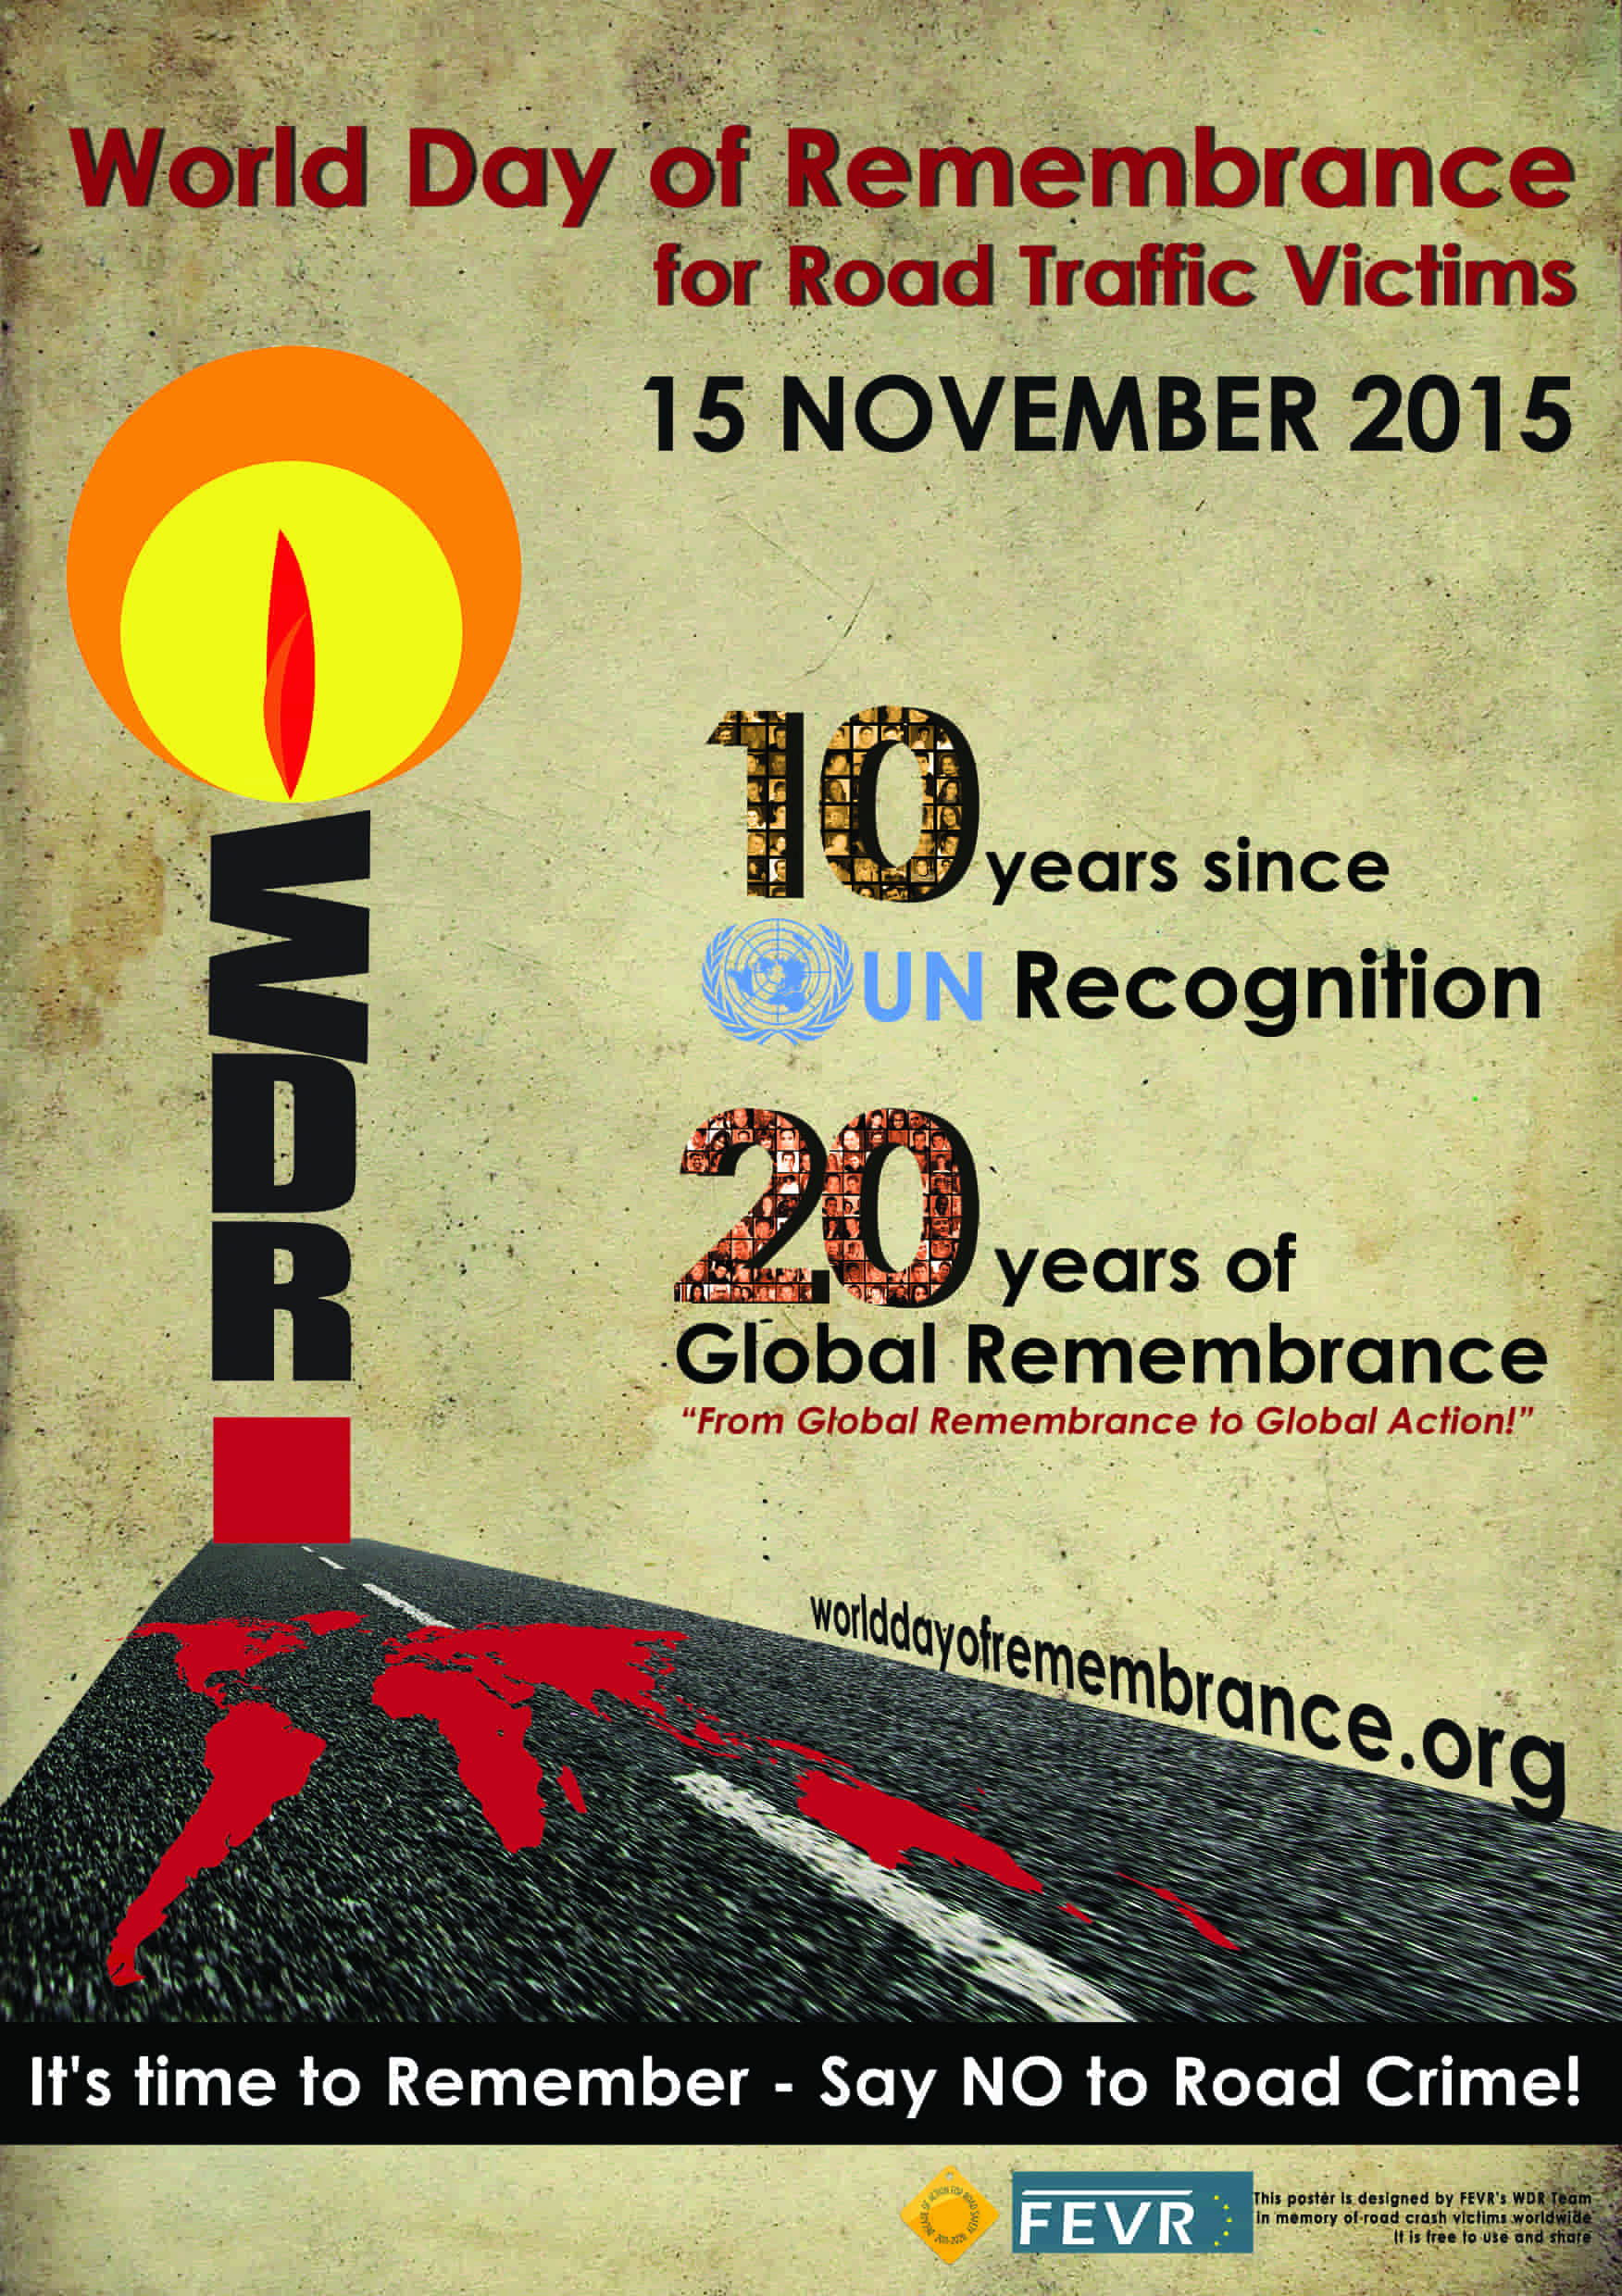 Focus on Road Safety on the World Day of Remembrance 2015